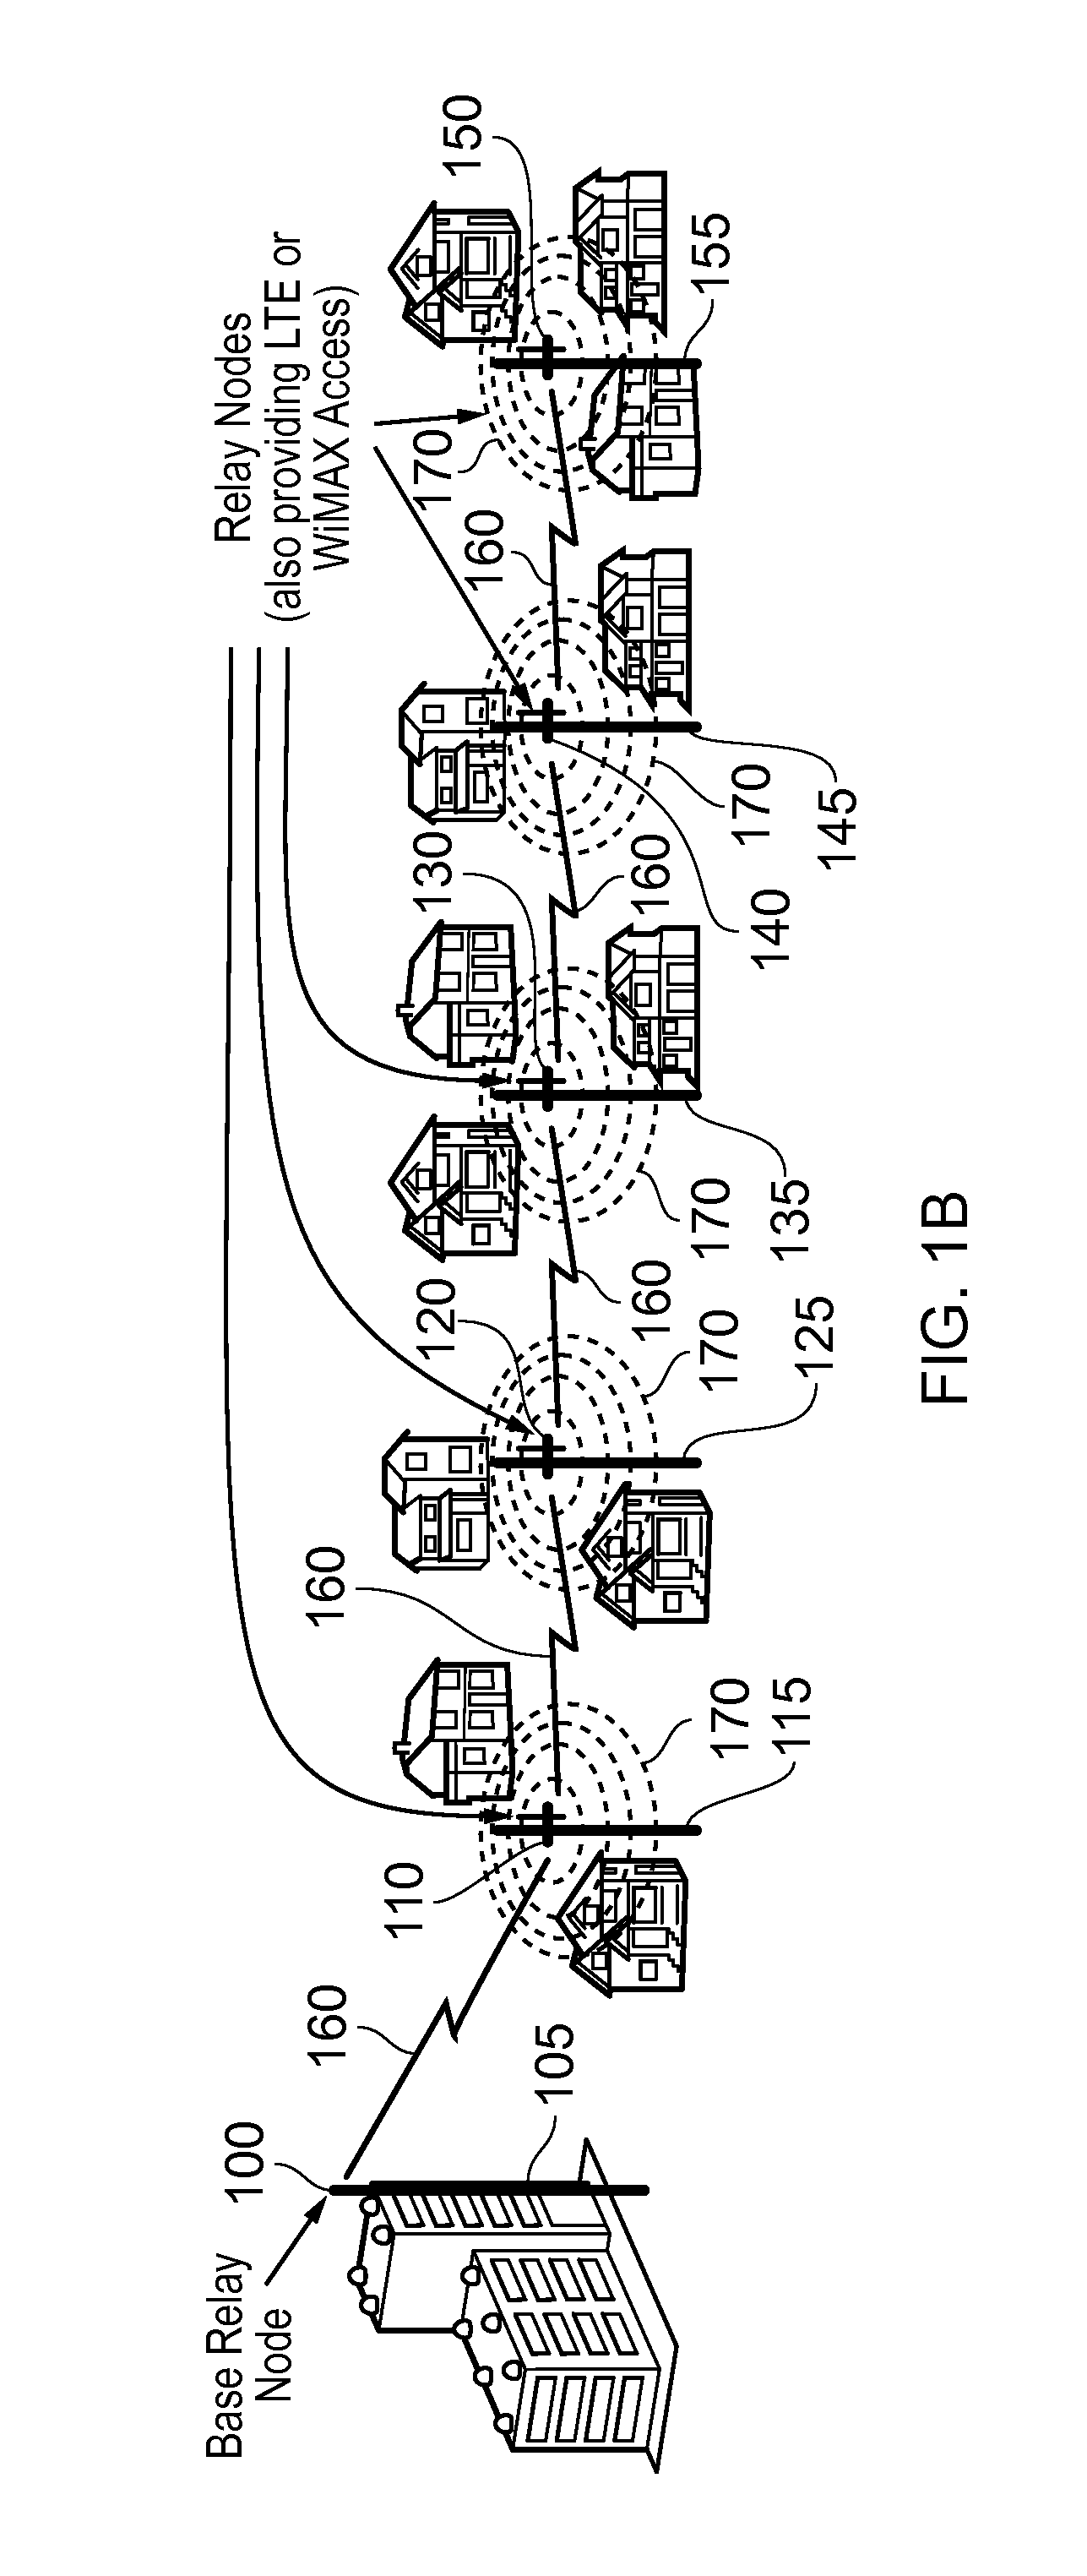 System and Method for Determining a Communications Schedule for Relay Nodes of a Wireless Relay Network